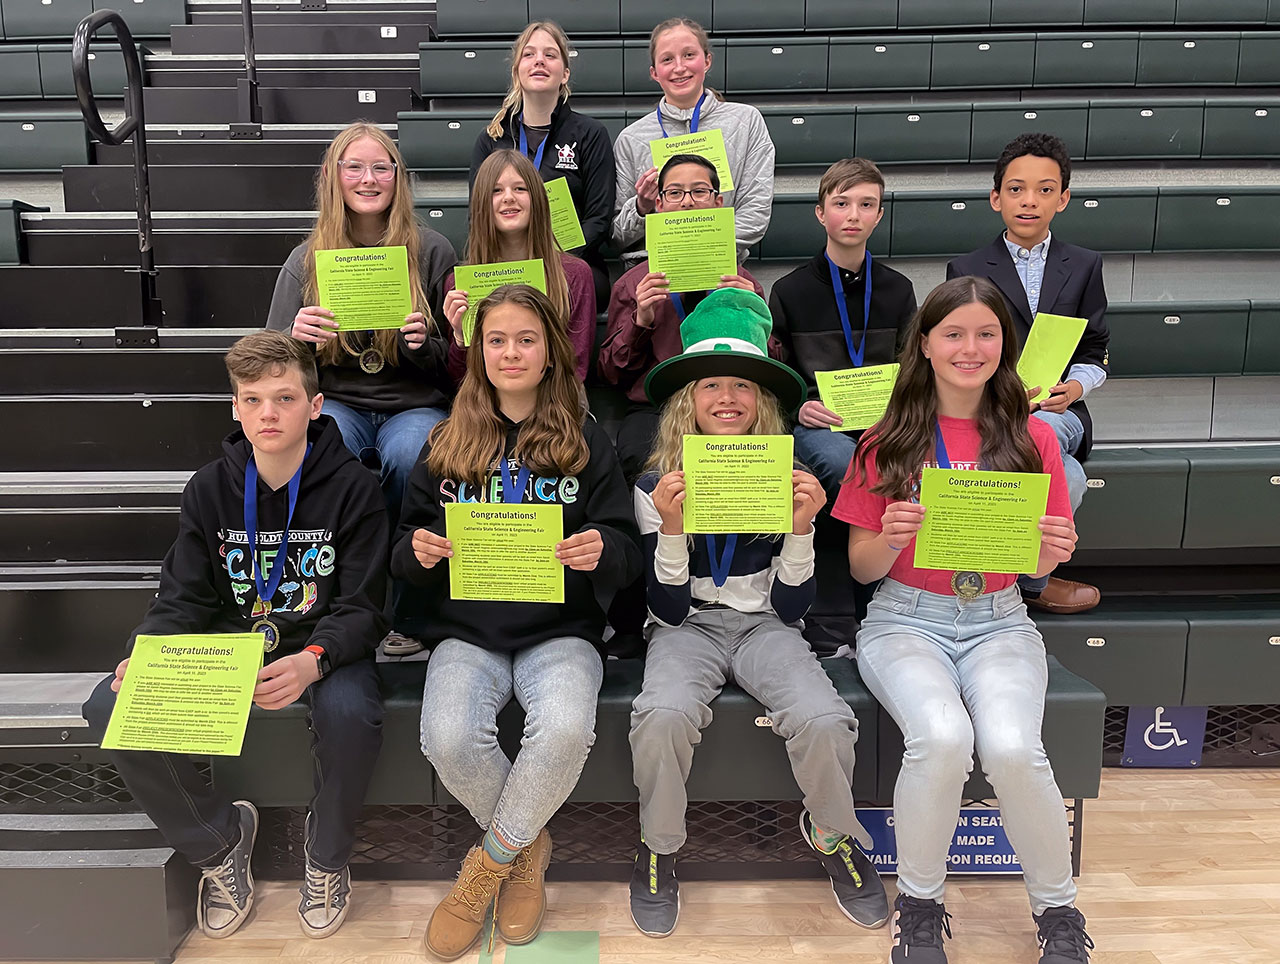 These students will be competing at the state Science Fair.